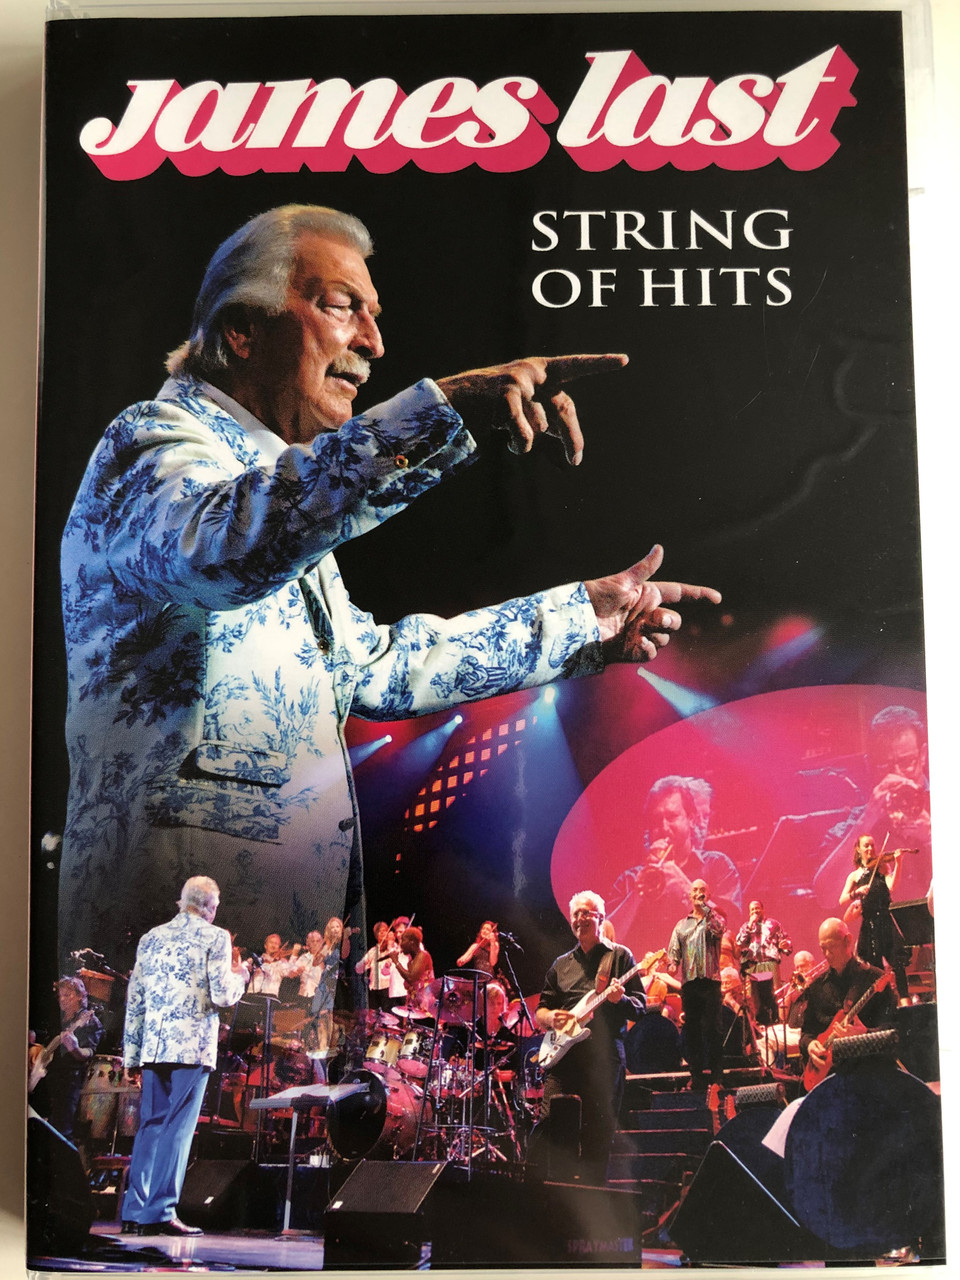 James Last - String of Hits DVD 2011 / The German Suite, Chicken Reel,  Granada, In the mood, Besame mucho, Doo wah diddy / Eagle Vision ‎– EREDV  880 / Ultimate medley collection - bibleinmylanguage